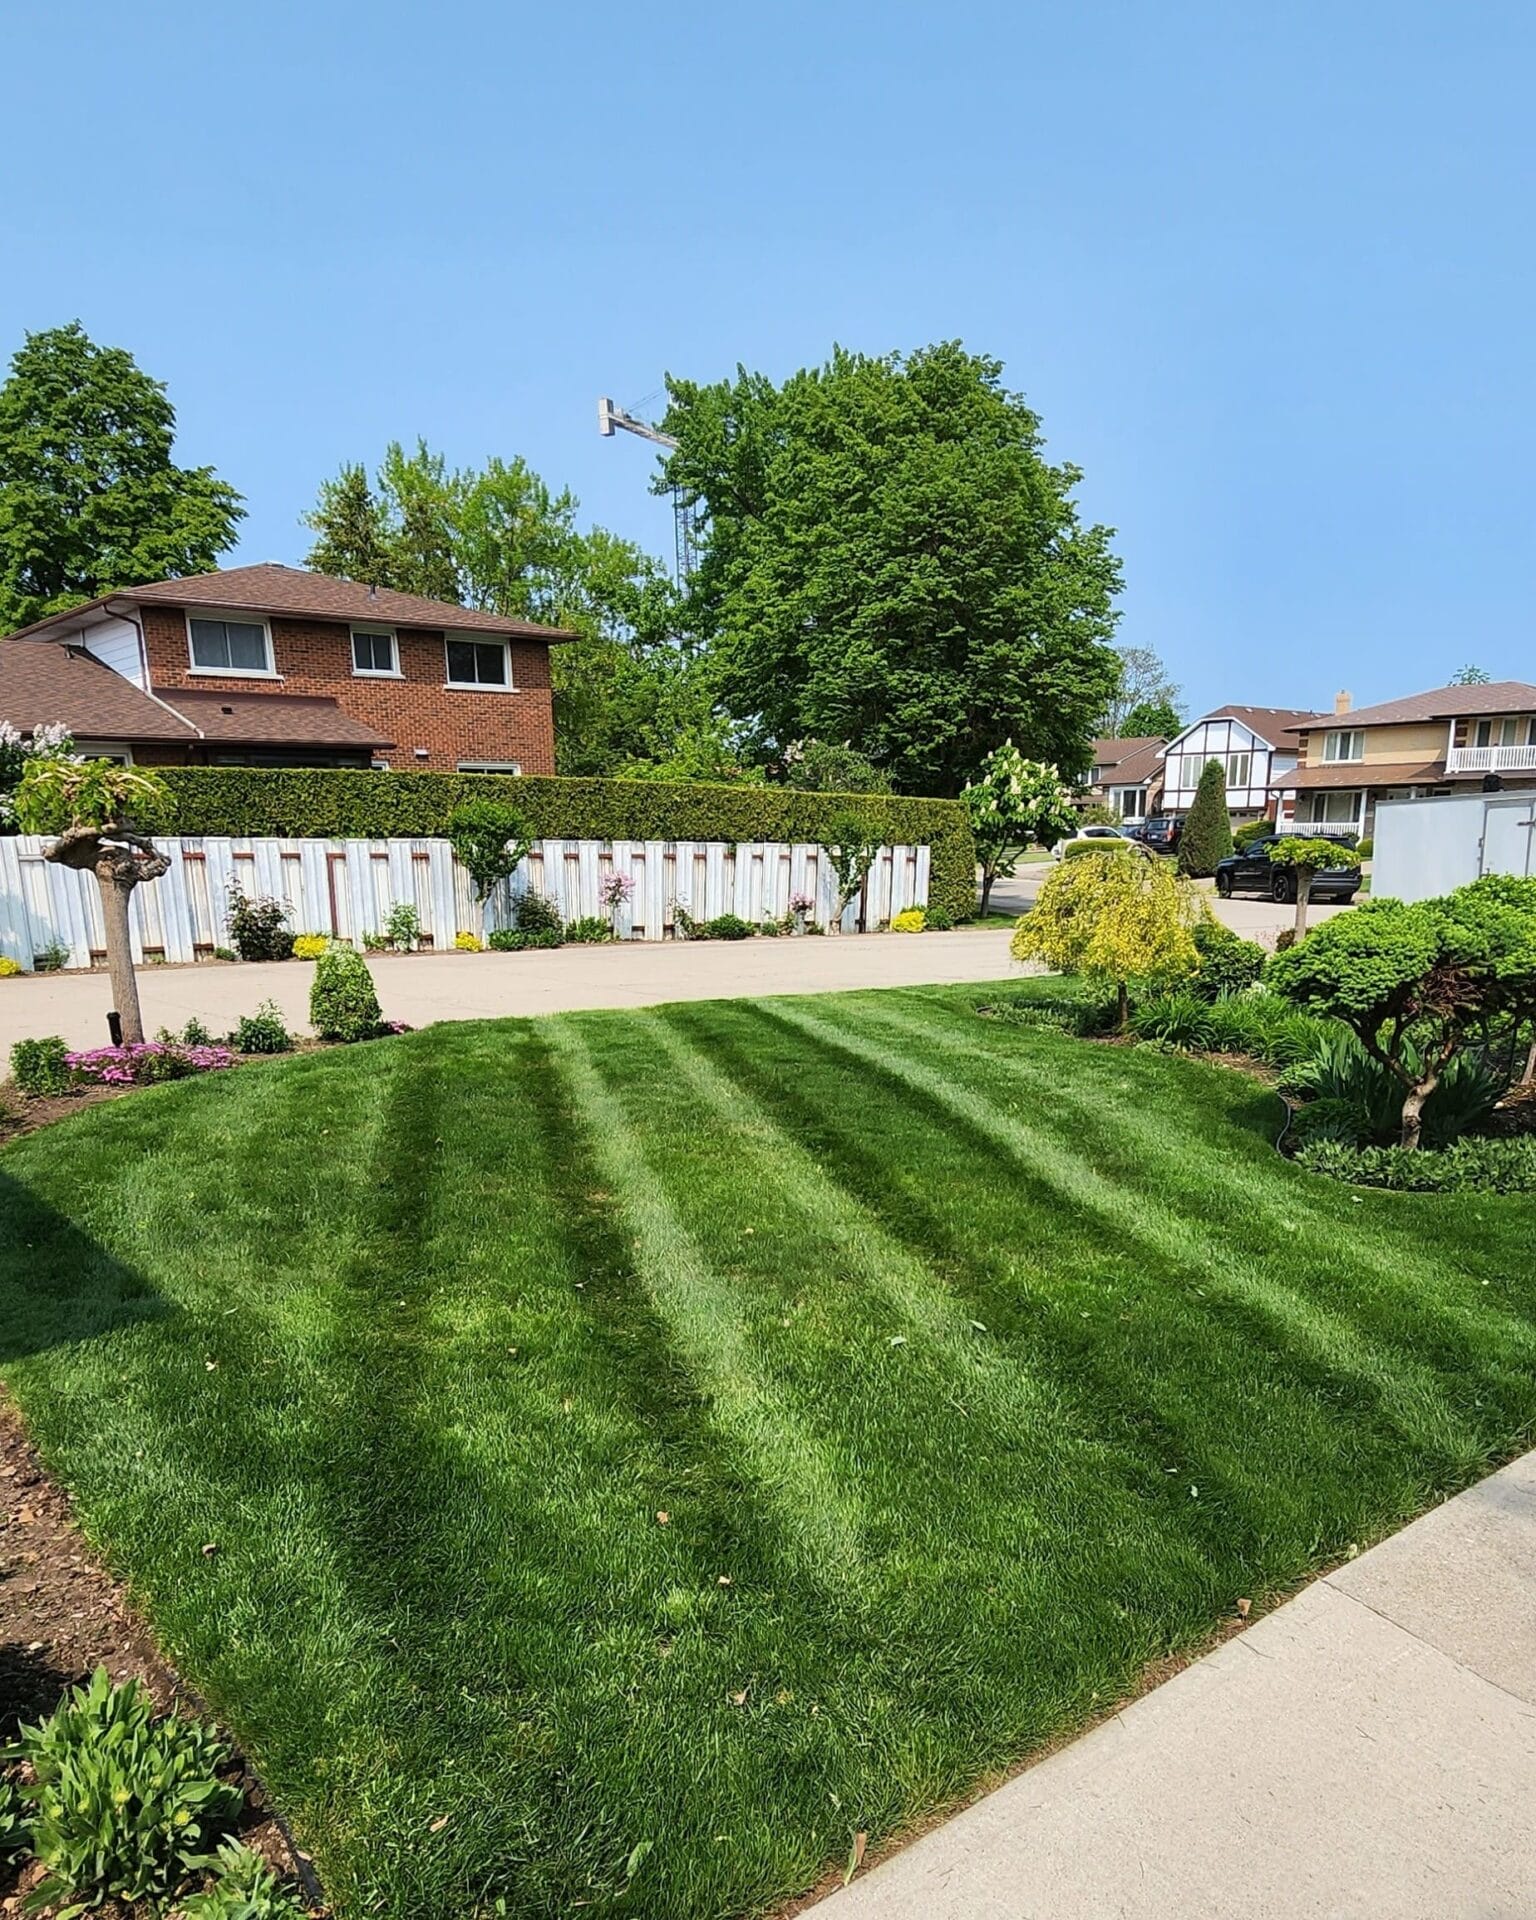 A well-manicured lawn in a residential area with a wooden fence and houses in the background, on a sunny day with clear blue skies.